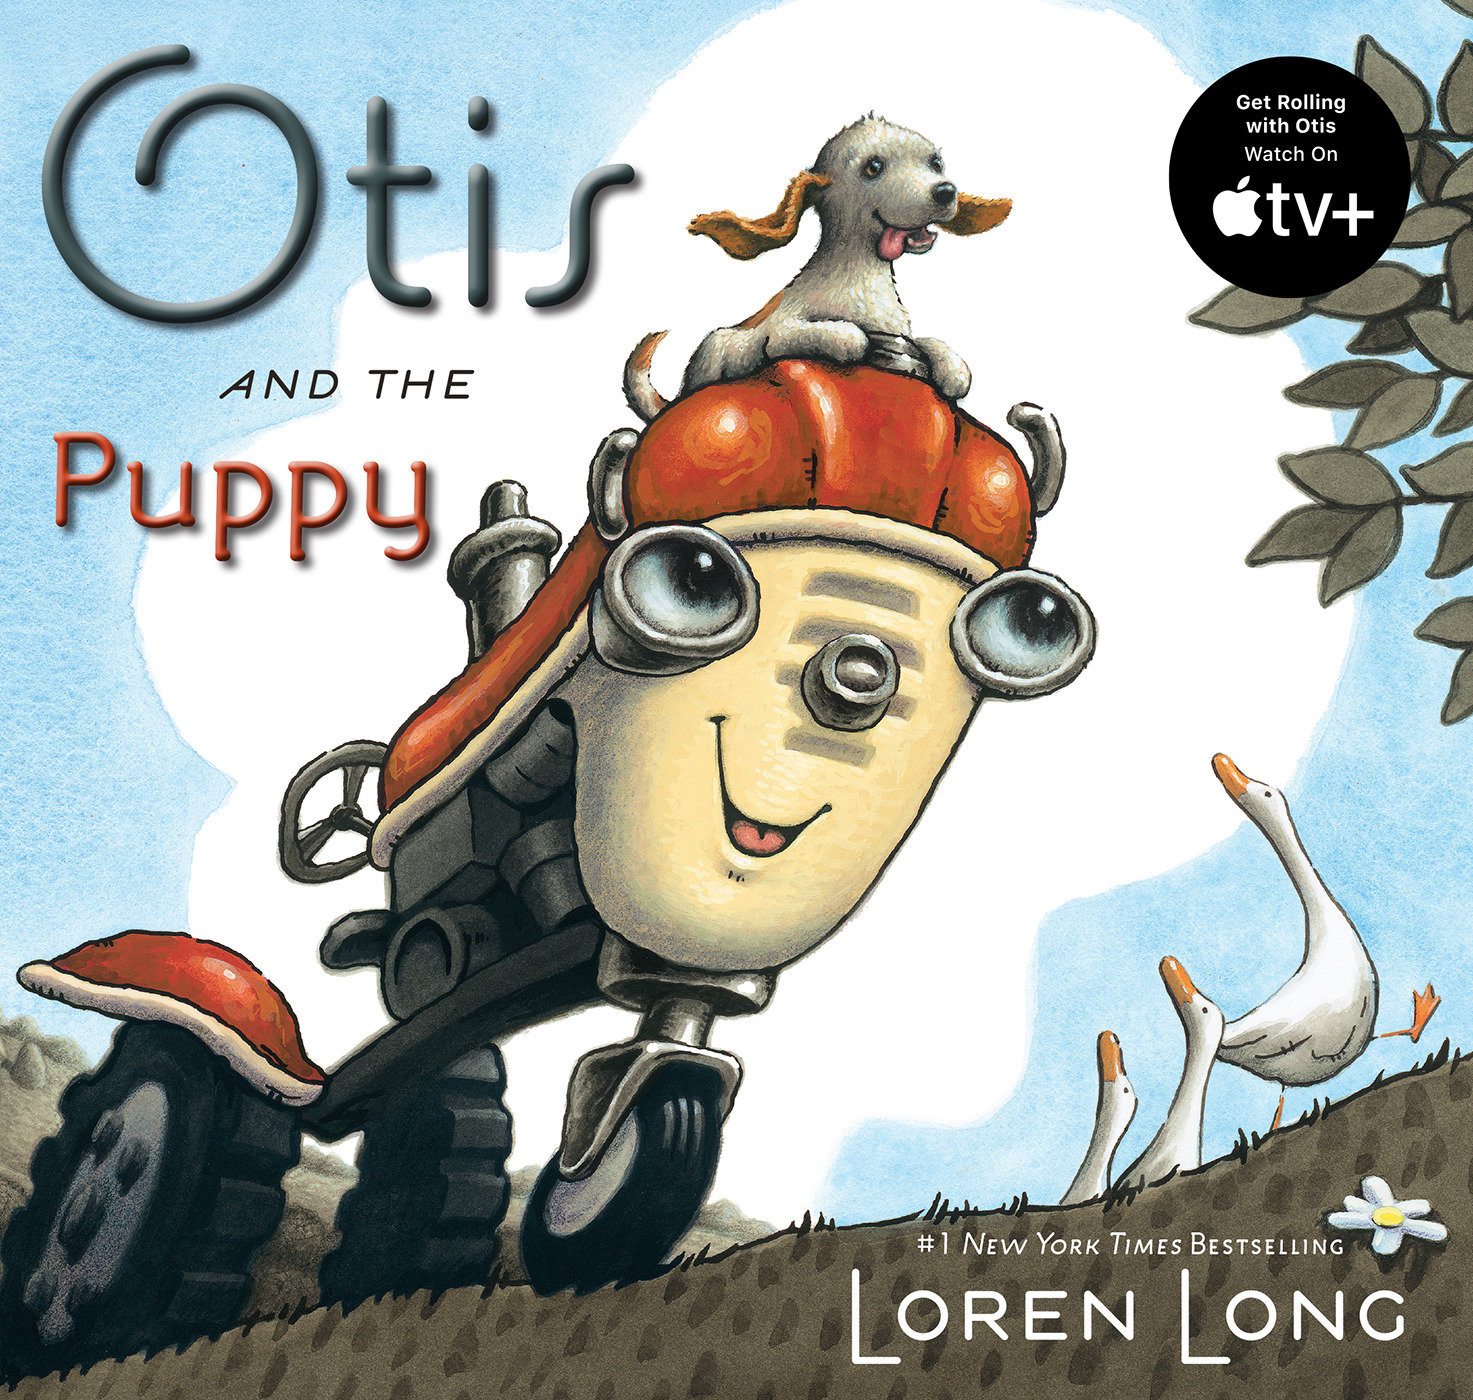 Otis And The Puppy Hardcover Board Book